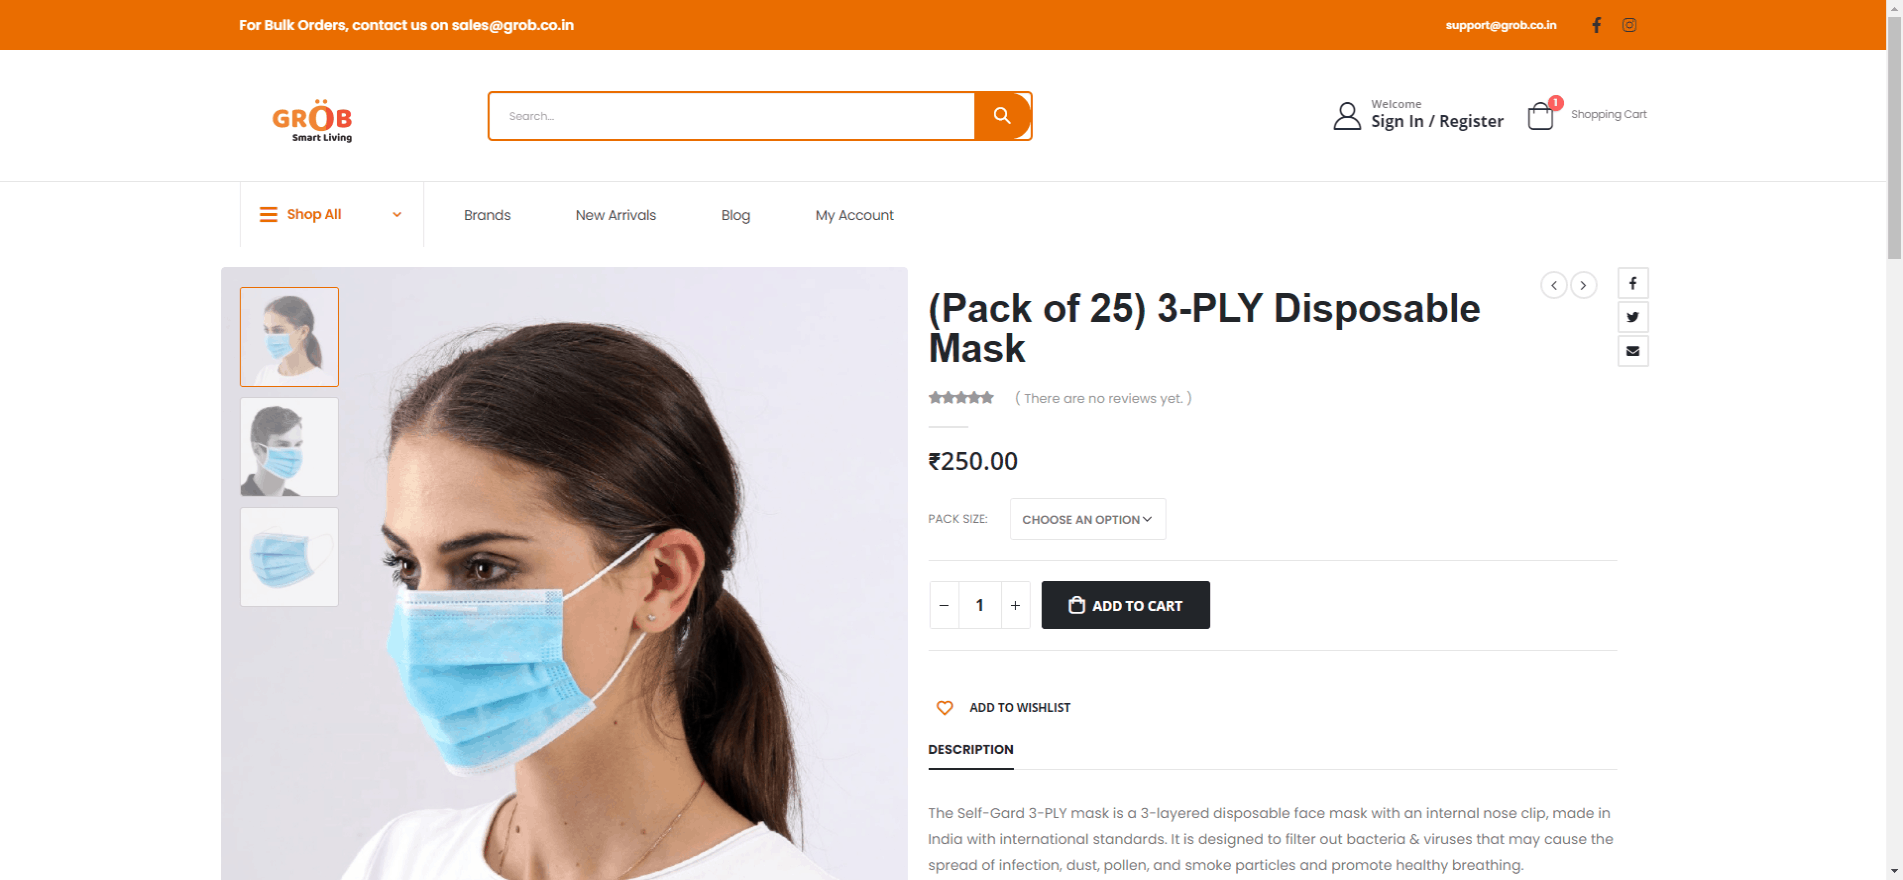 Pack-of-25-3-PLY-Disposable-Mask-Grob